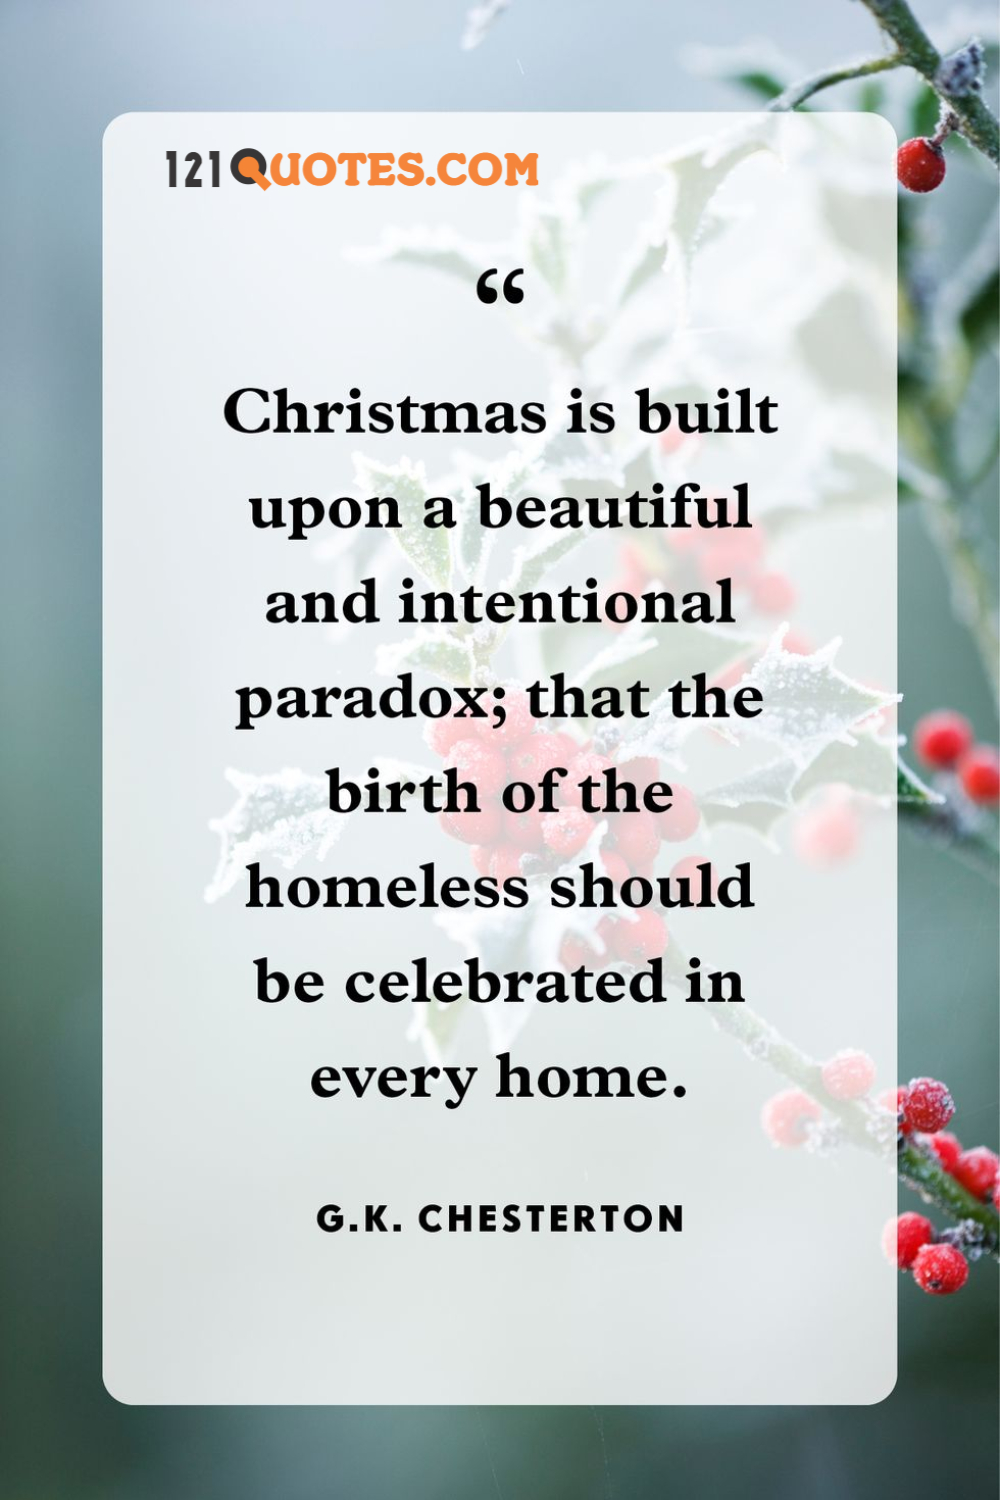 Greatest Christmas Quotes pic 